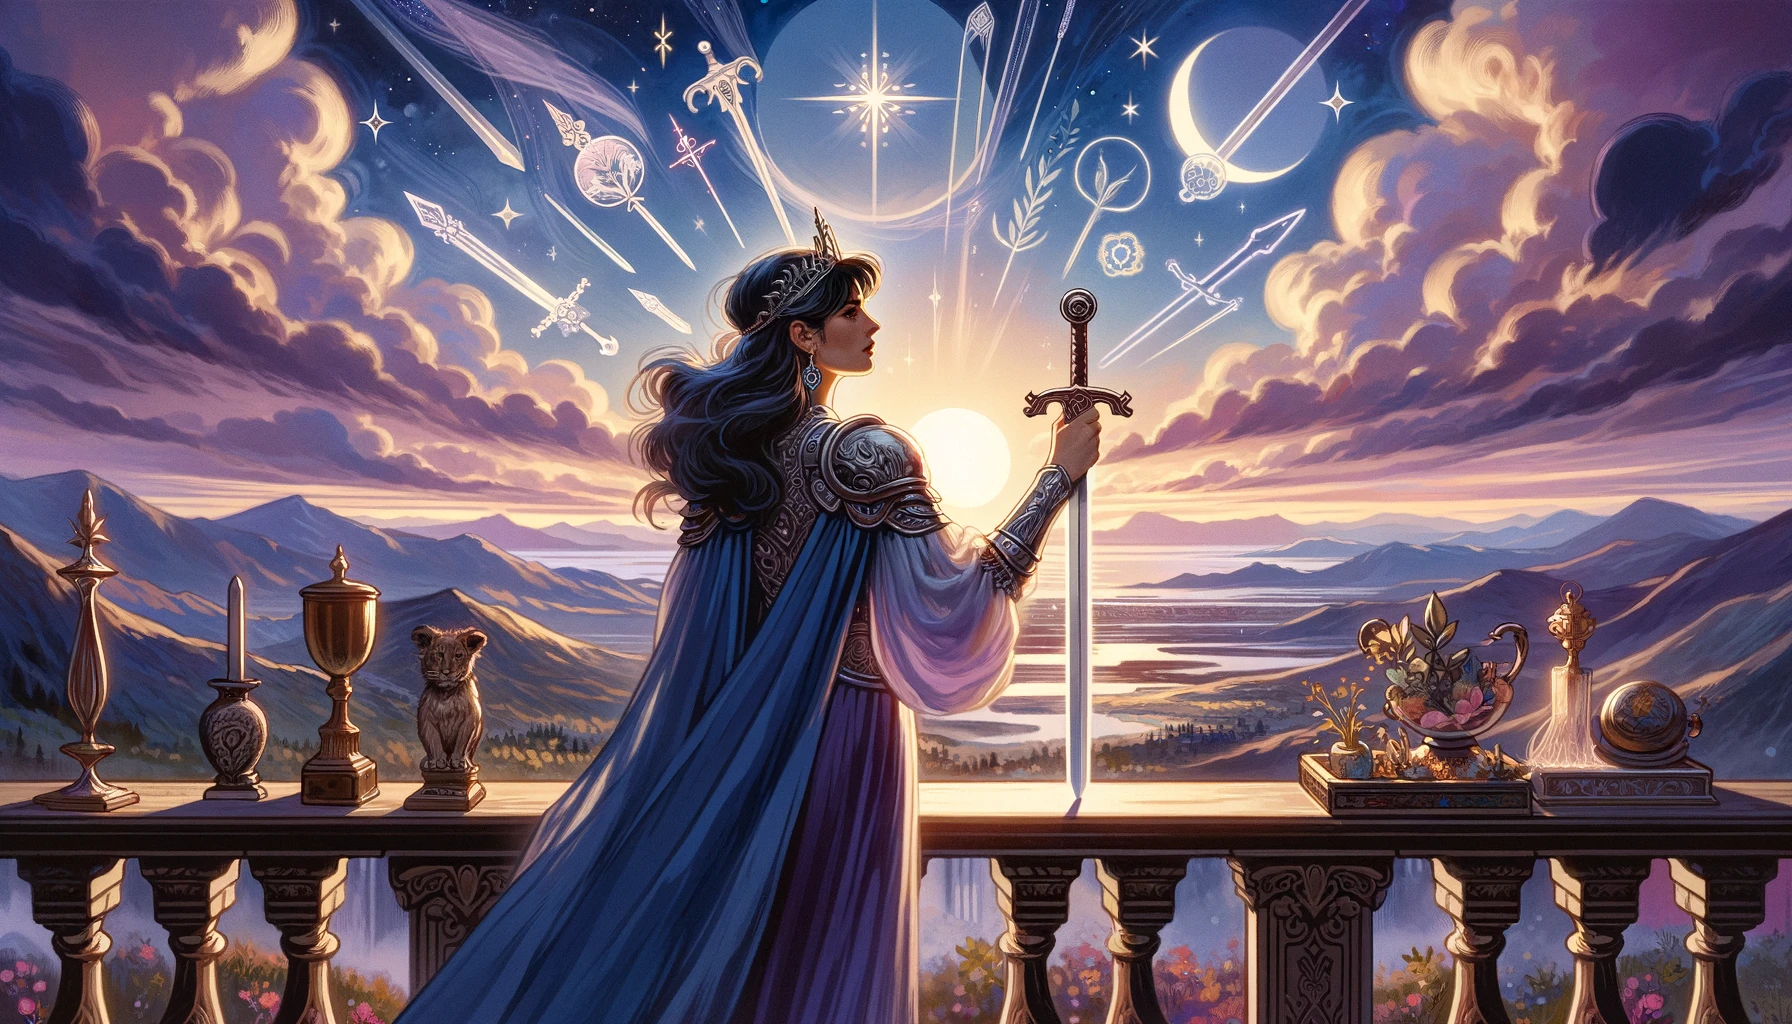 "The illustration portrays the Queen of Swords as a symbol of clear communication, intellectual connection, and independence within relationships. It enriches the article by visually interpreting the card's significance in love readings, emphasizing values of mutual respect, clear communication, and emotional maturity."